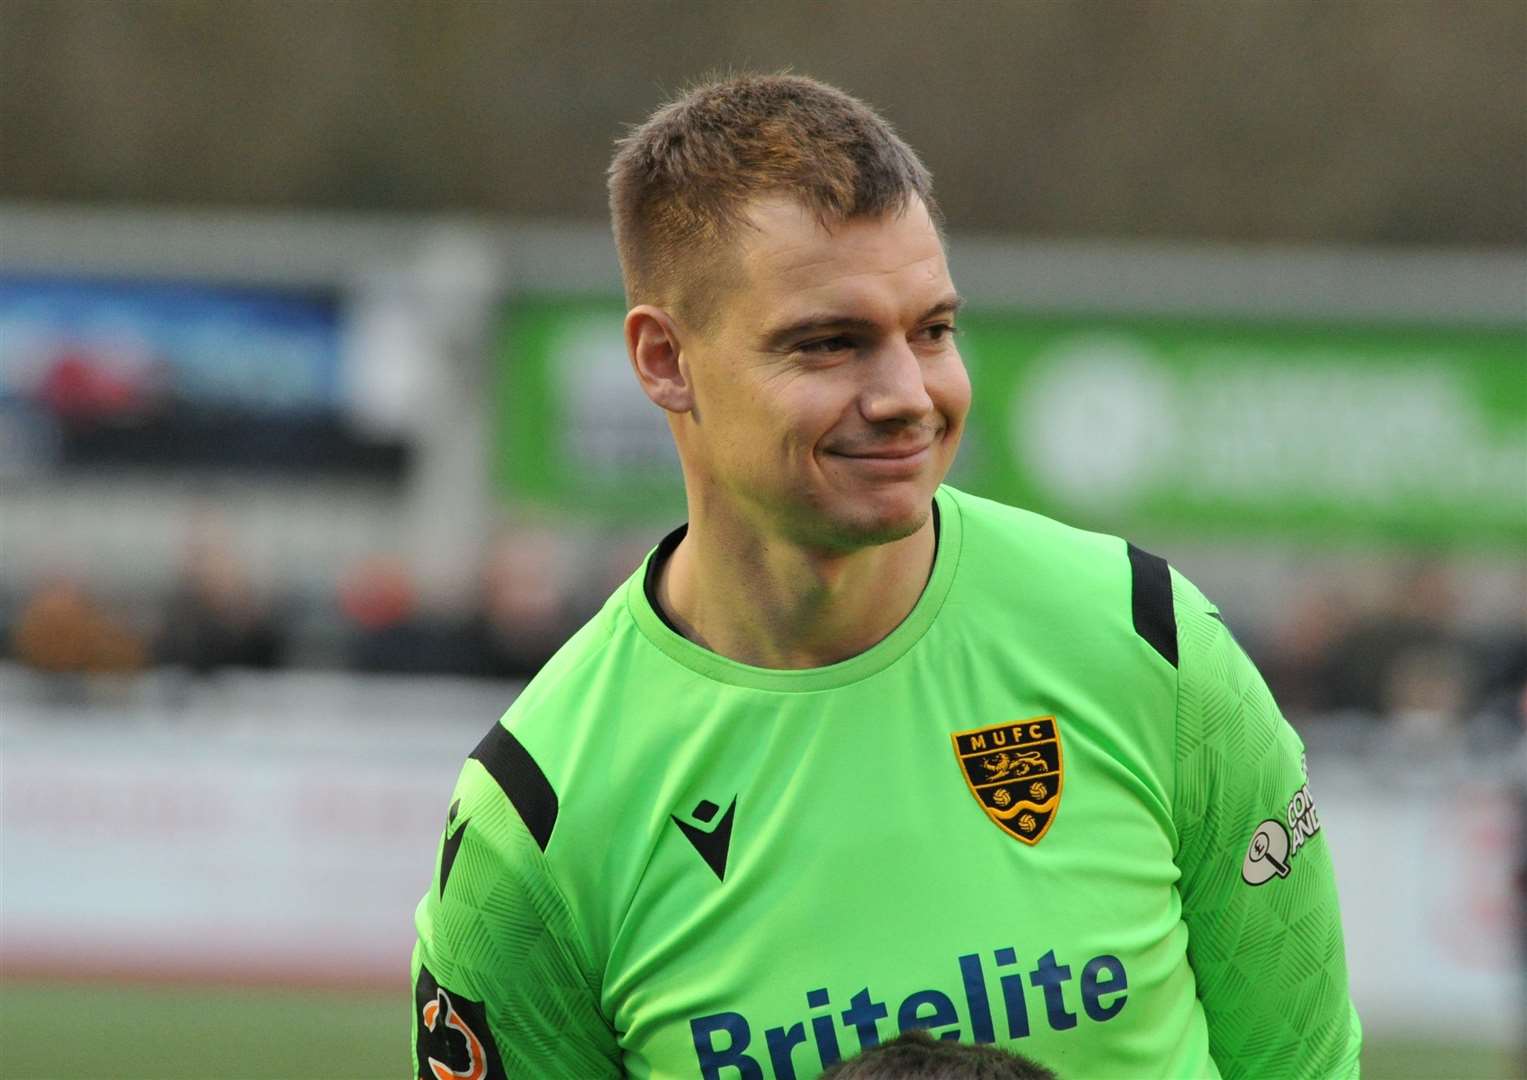 Goalkeeper Chris Lewington has joined Cray Valley Picture: Steve Terrell